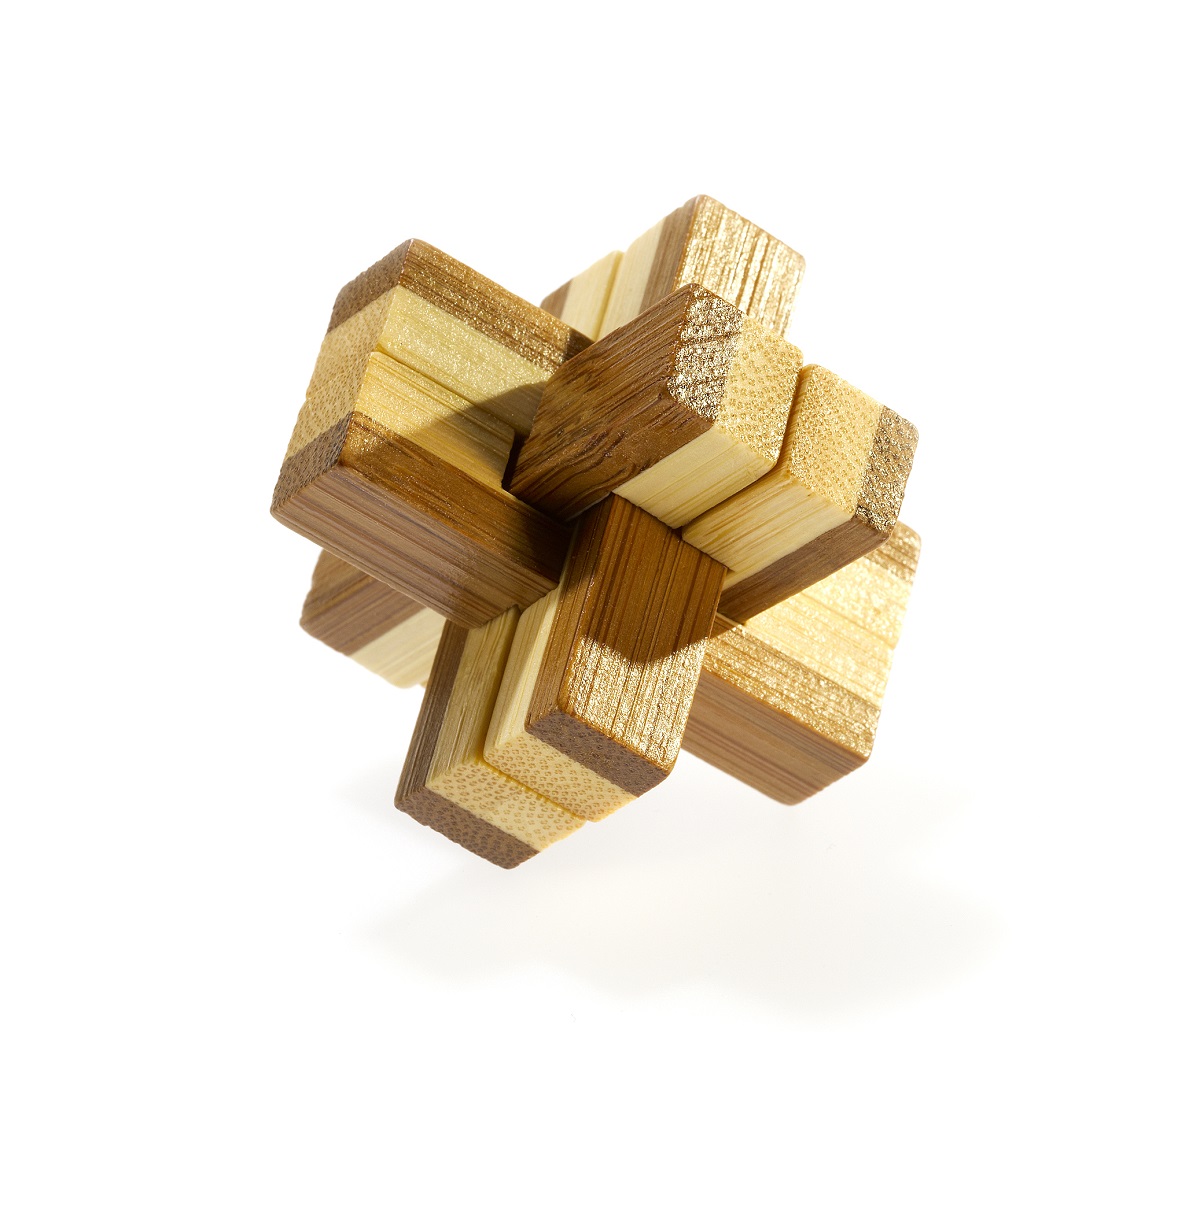 Bamboo Puzzle: Knotty